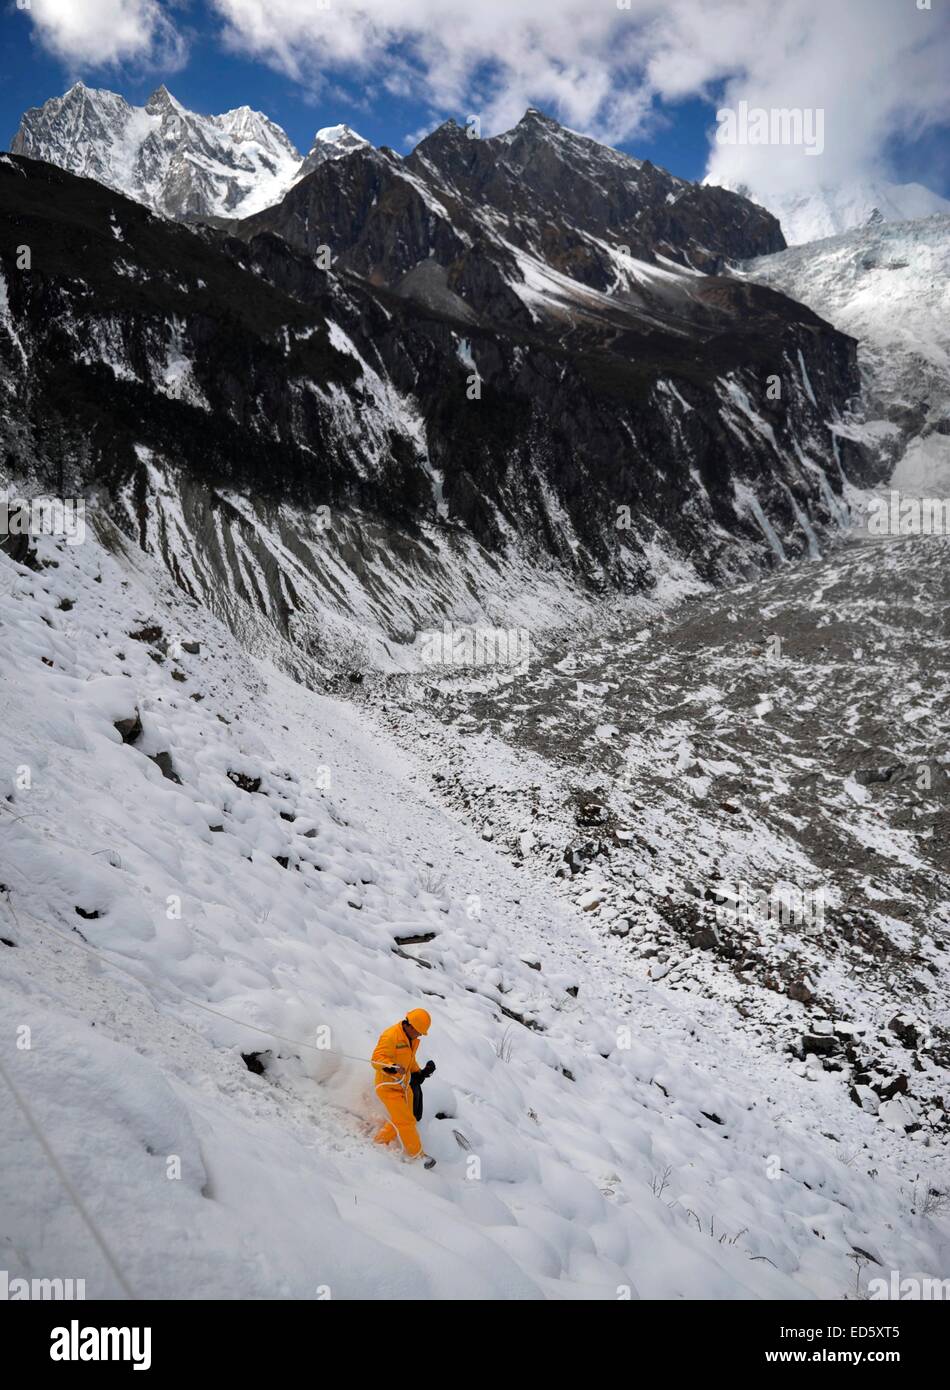 Garz, Sichuan, China. 28th Dec, 2014. A sanitation worker is cleaning the trash which throw by tourists dangerously on the glacier of conch gully in Garz, Sichuan, China on 28th December, 2014. © TopPhoto/Alamy Live News Stock Photo